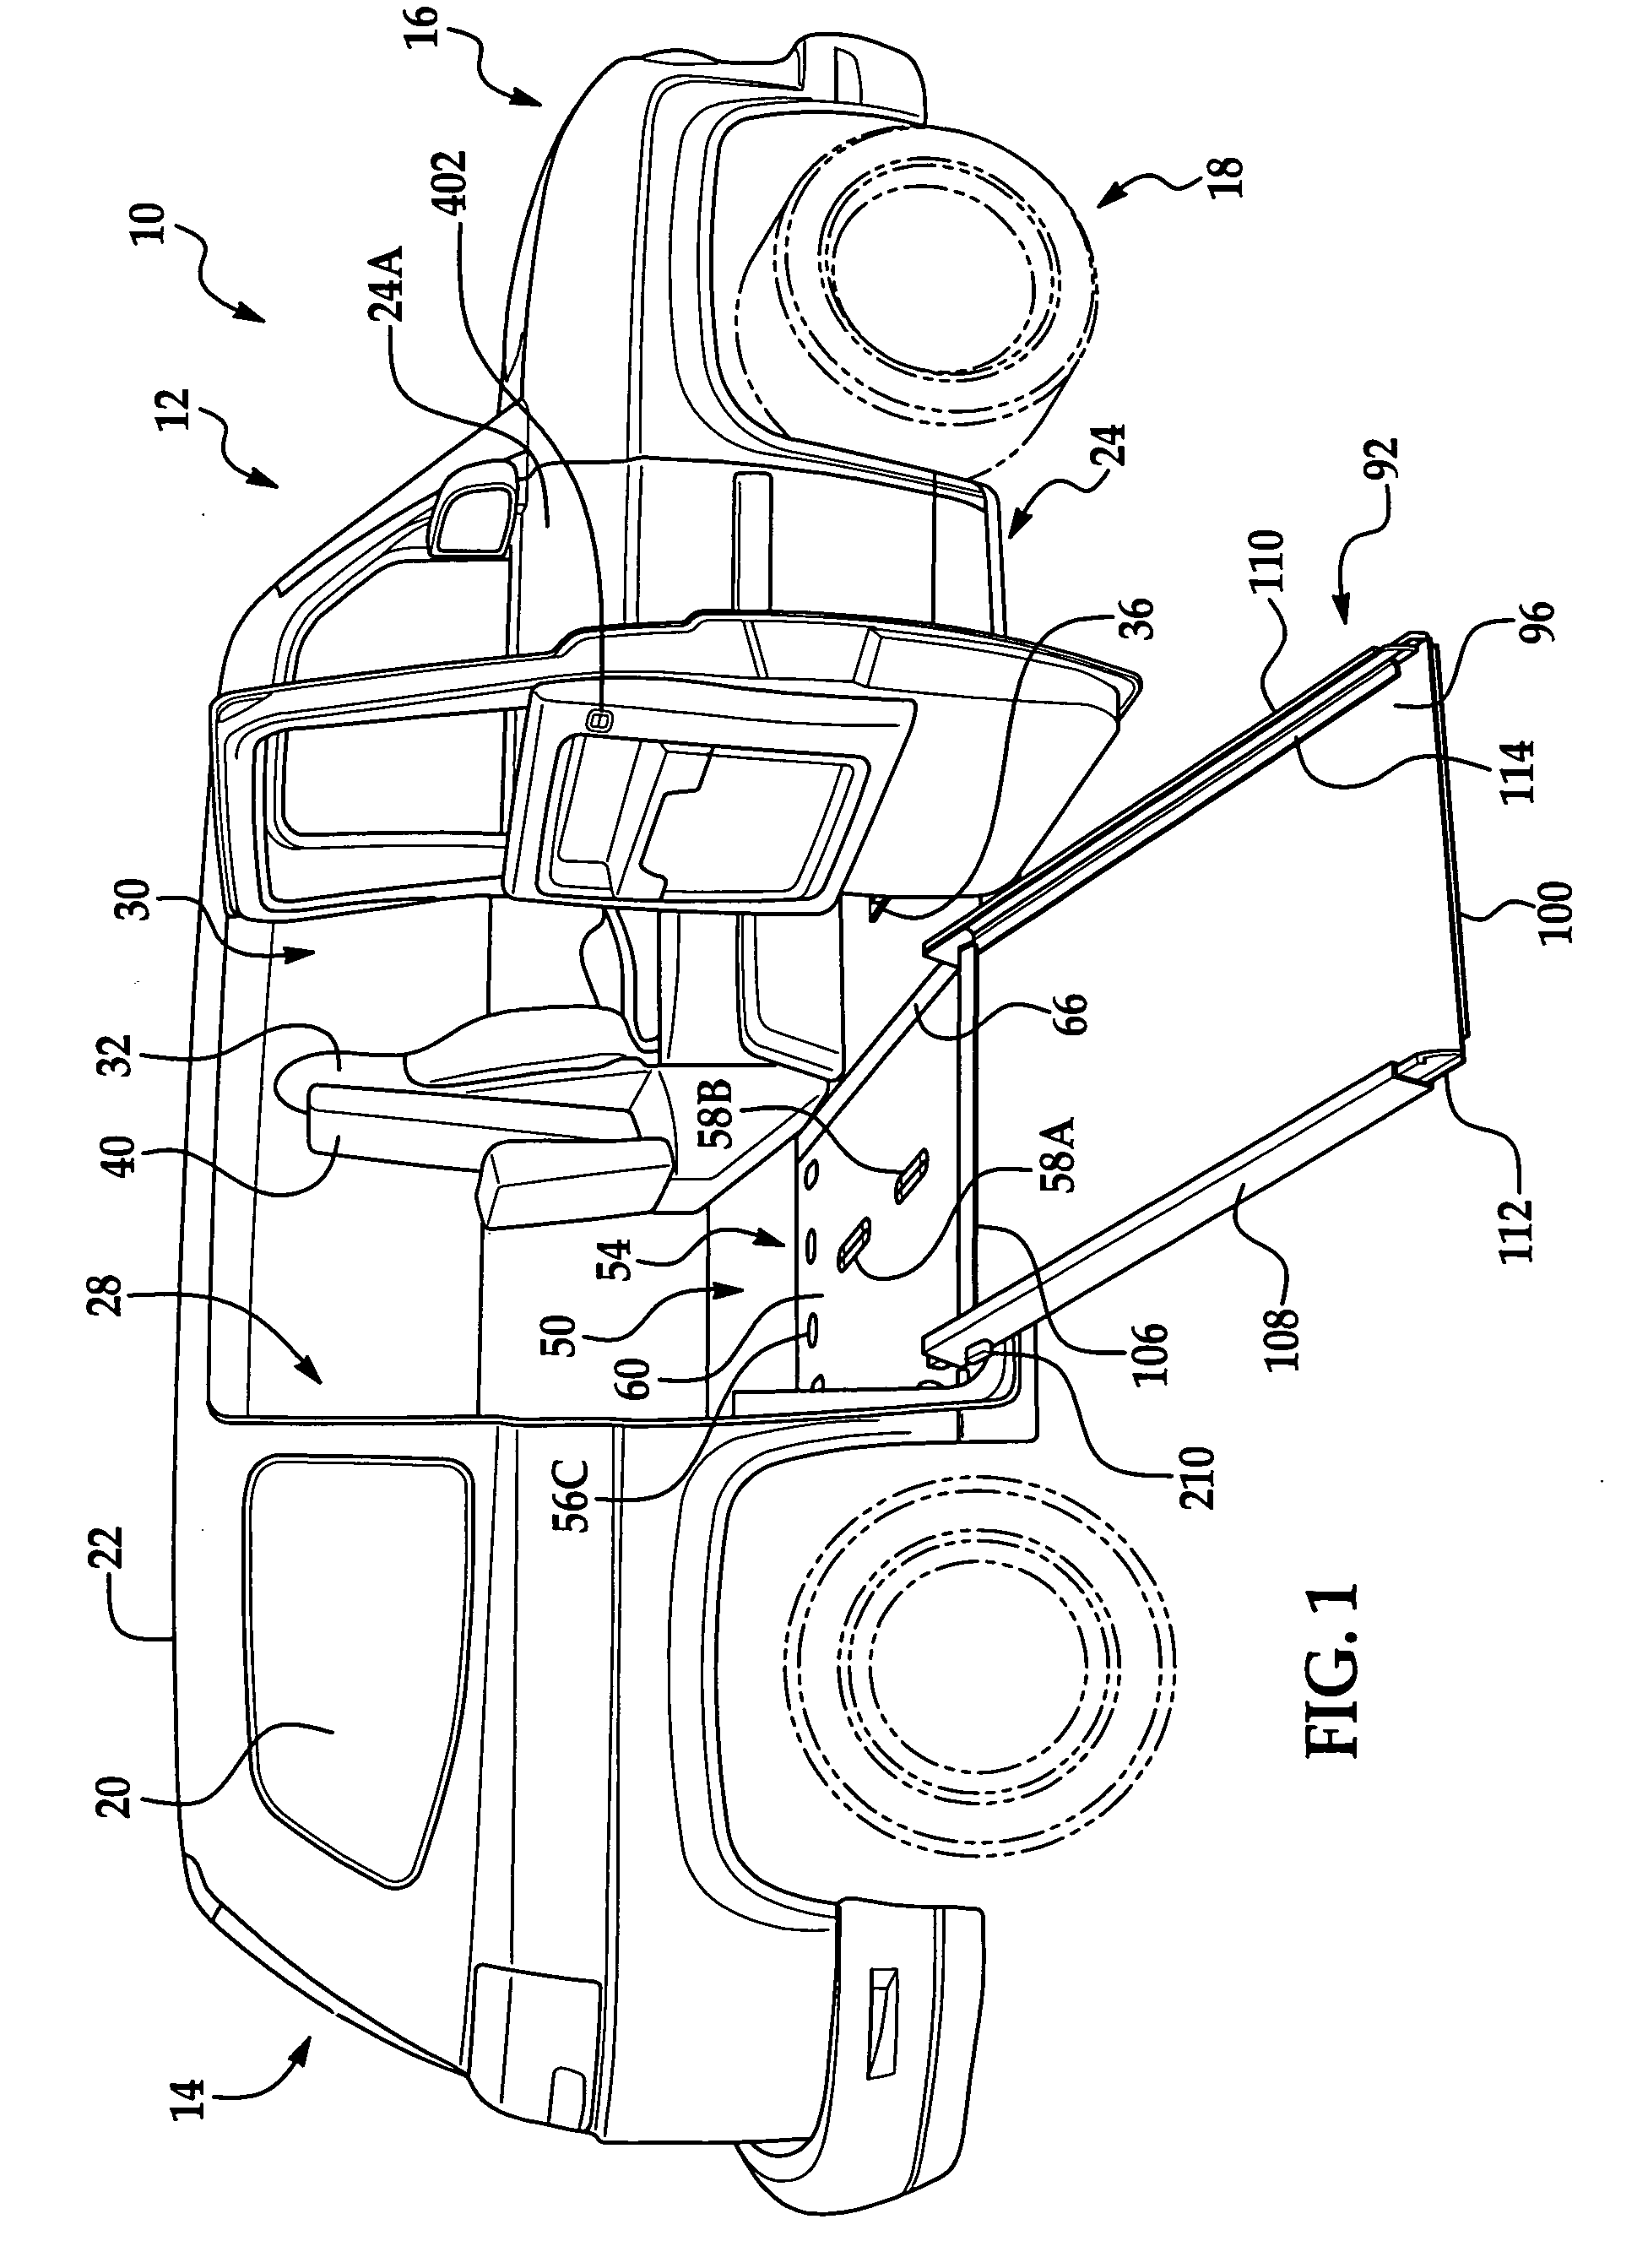 Automotive vehicle having a power-actuated ramp